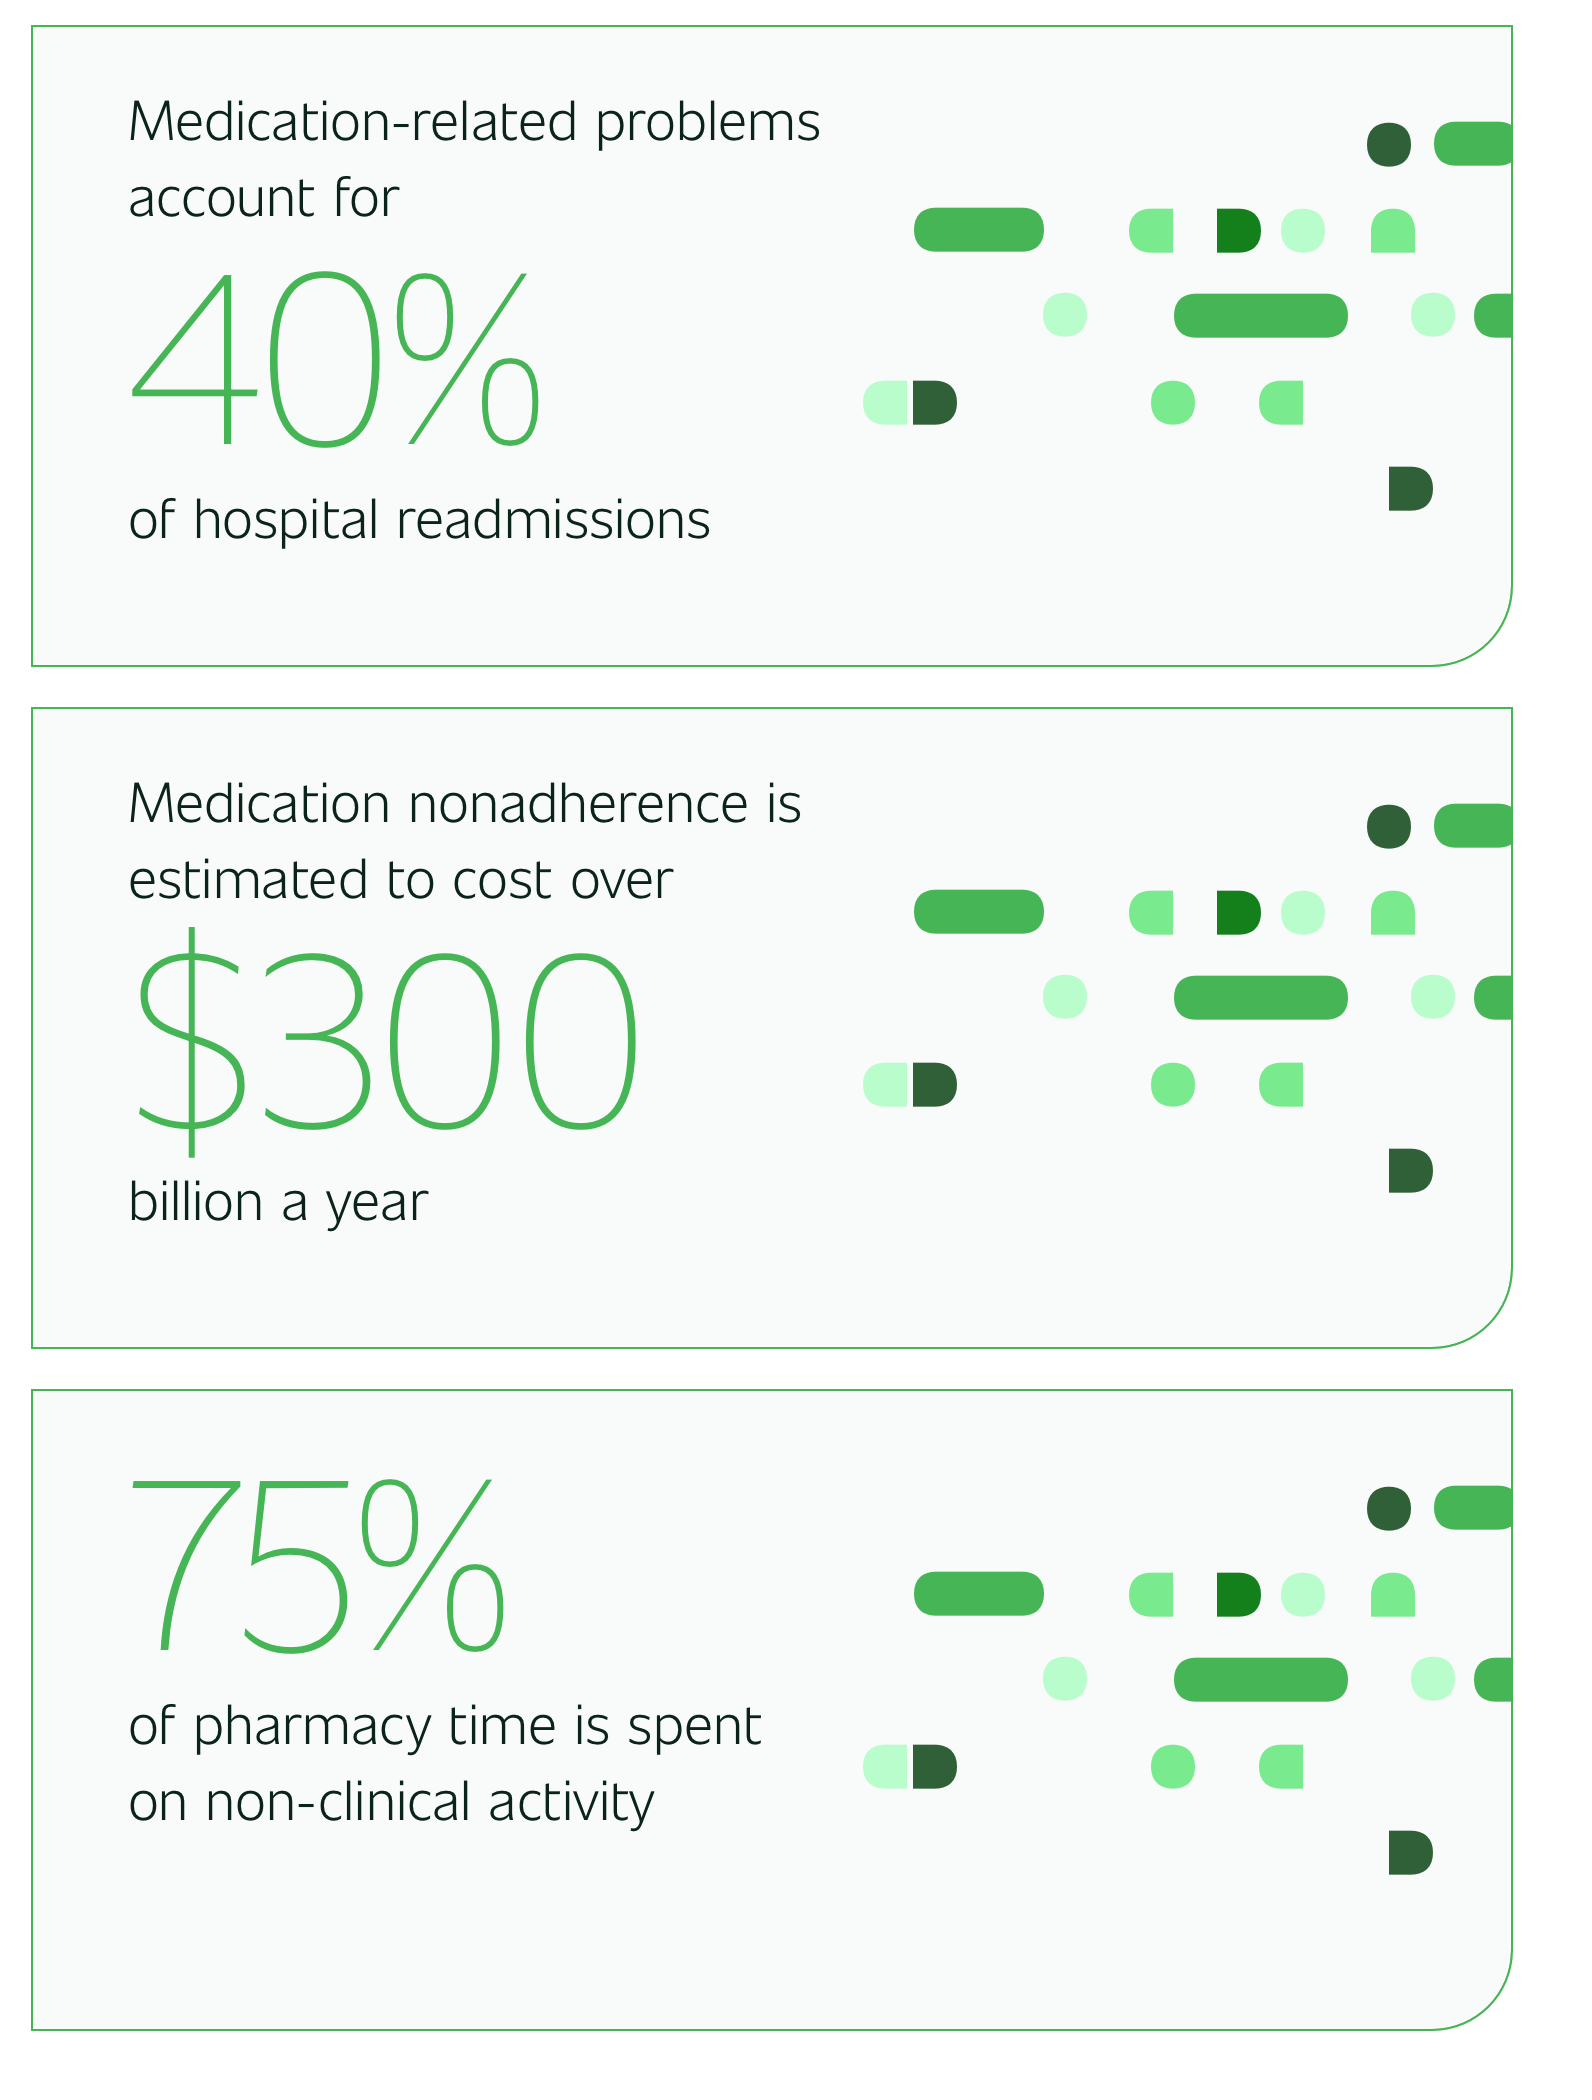 Medication-related problems account for 40% of hospital readmissions.